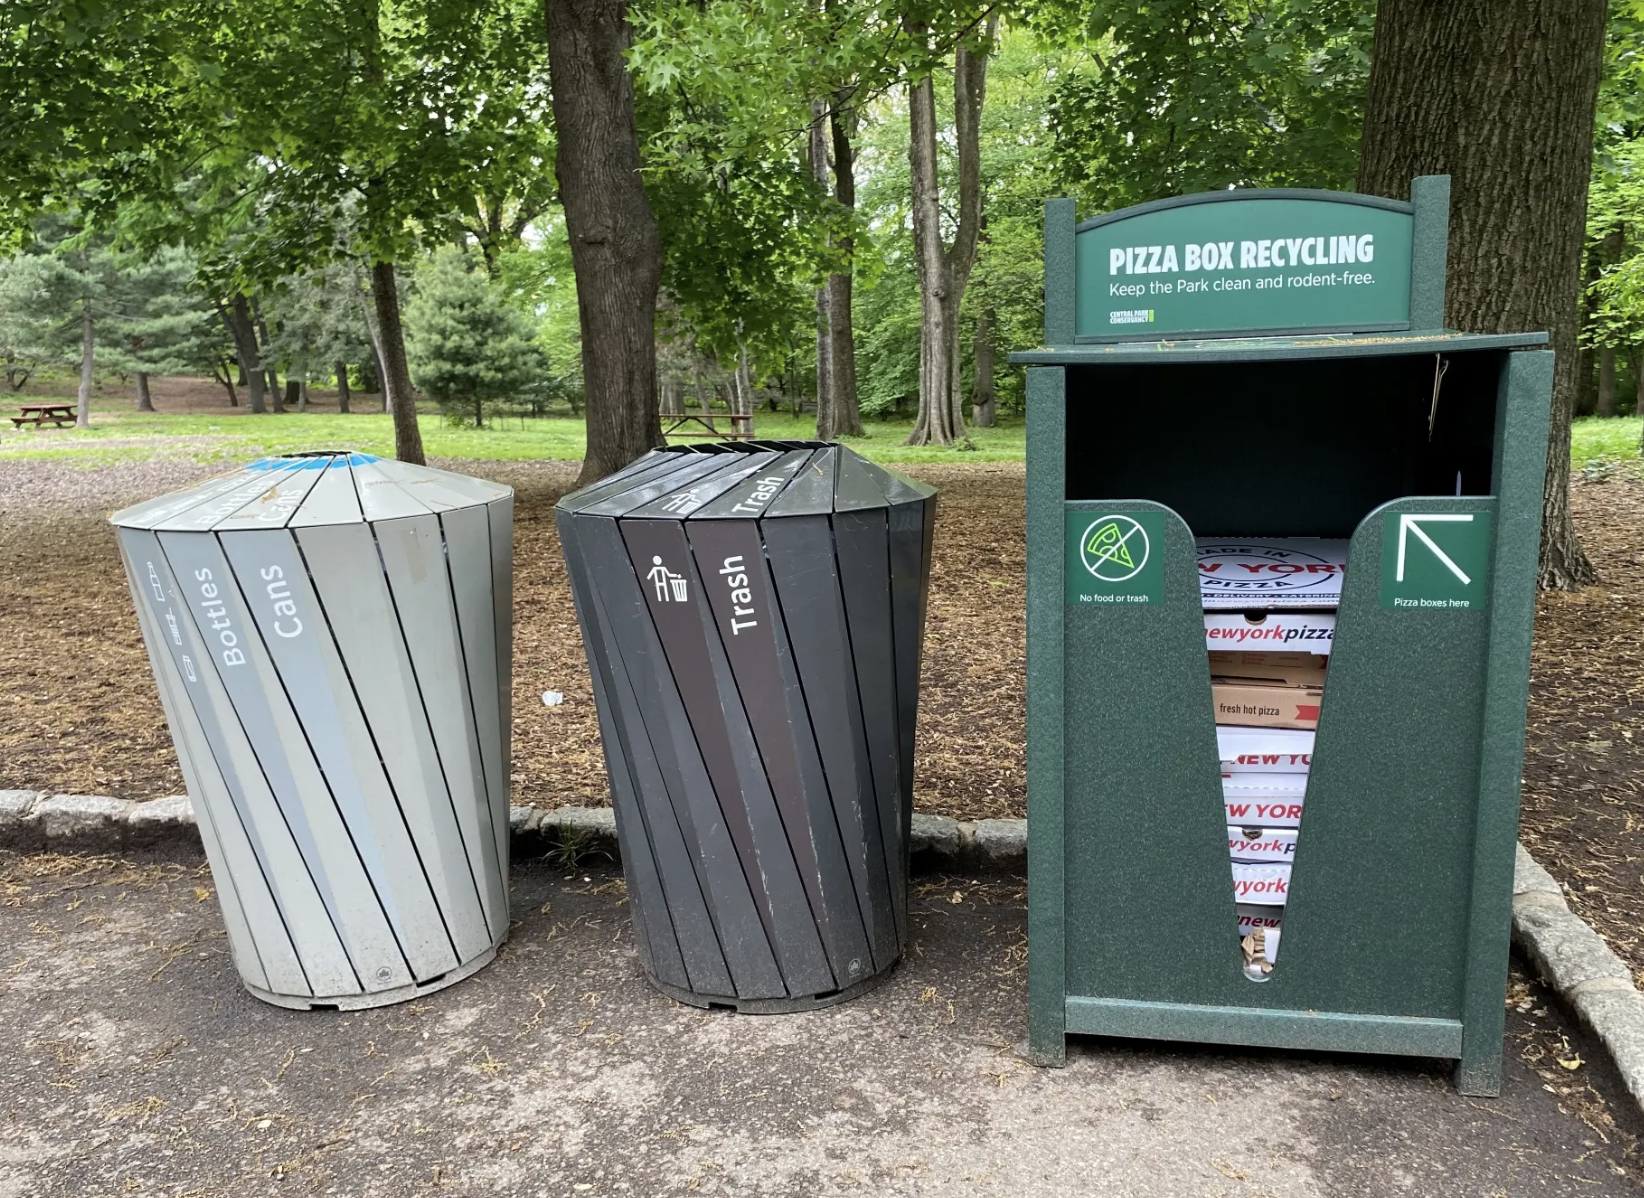 Hey, New York. You Can Now Recycle Your Pizza Boxes In This Handy Recycling Bin